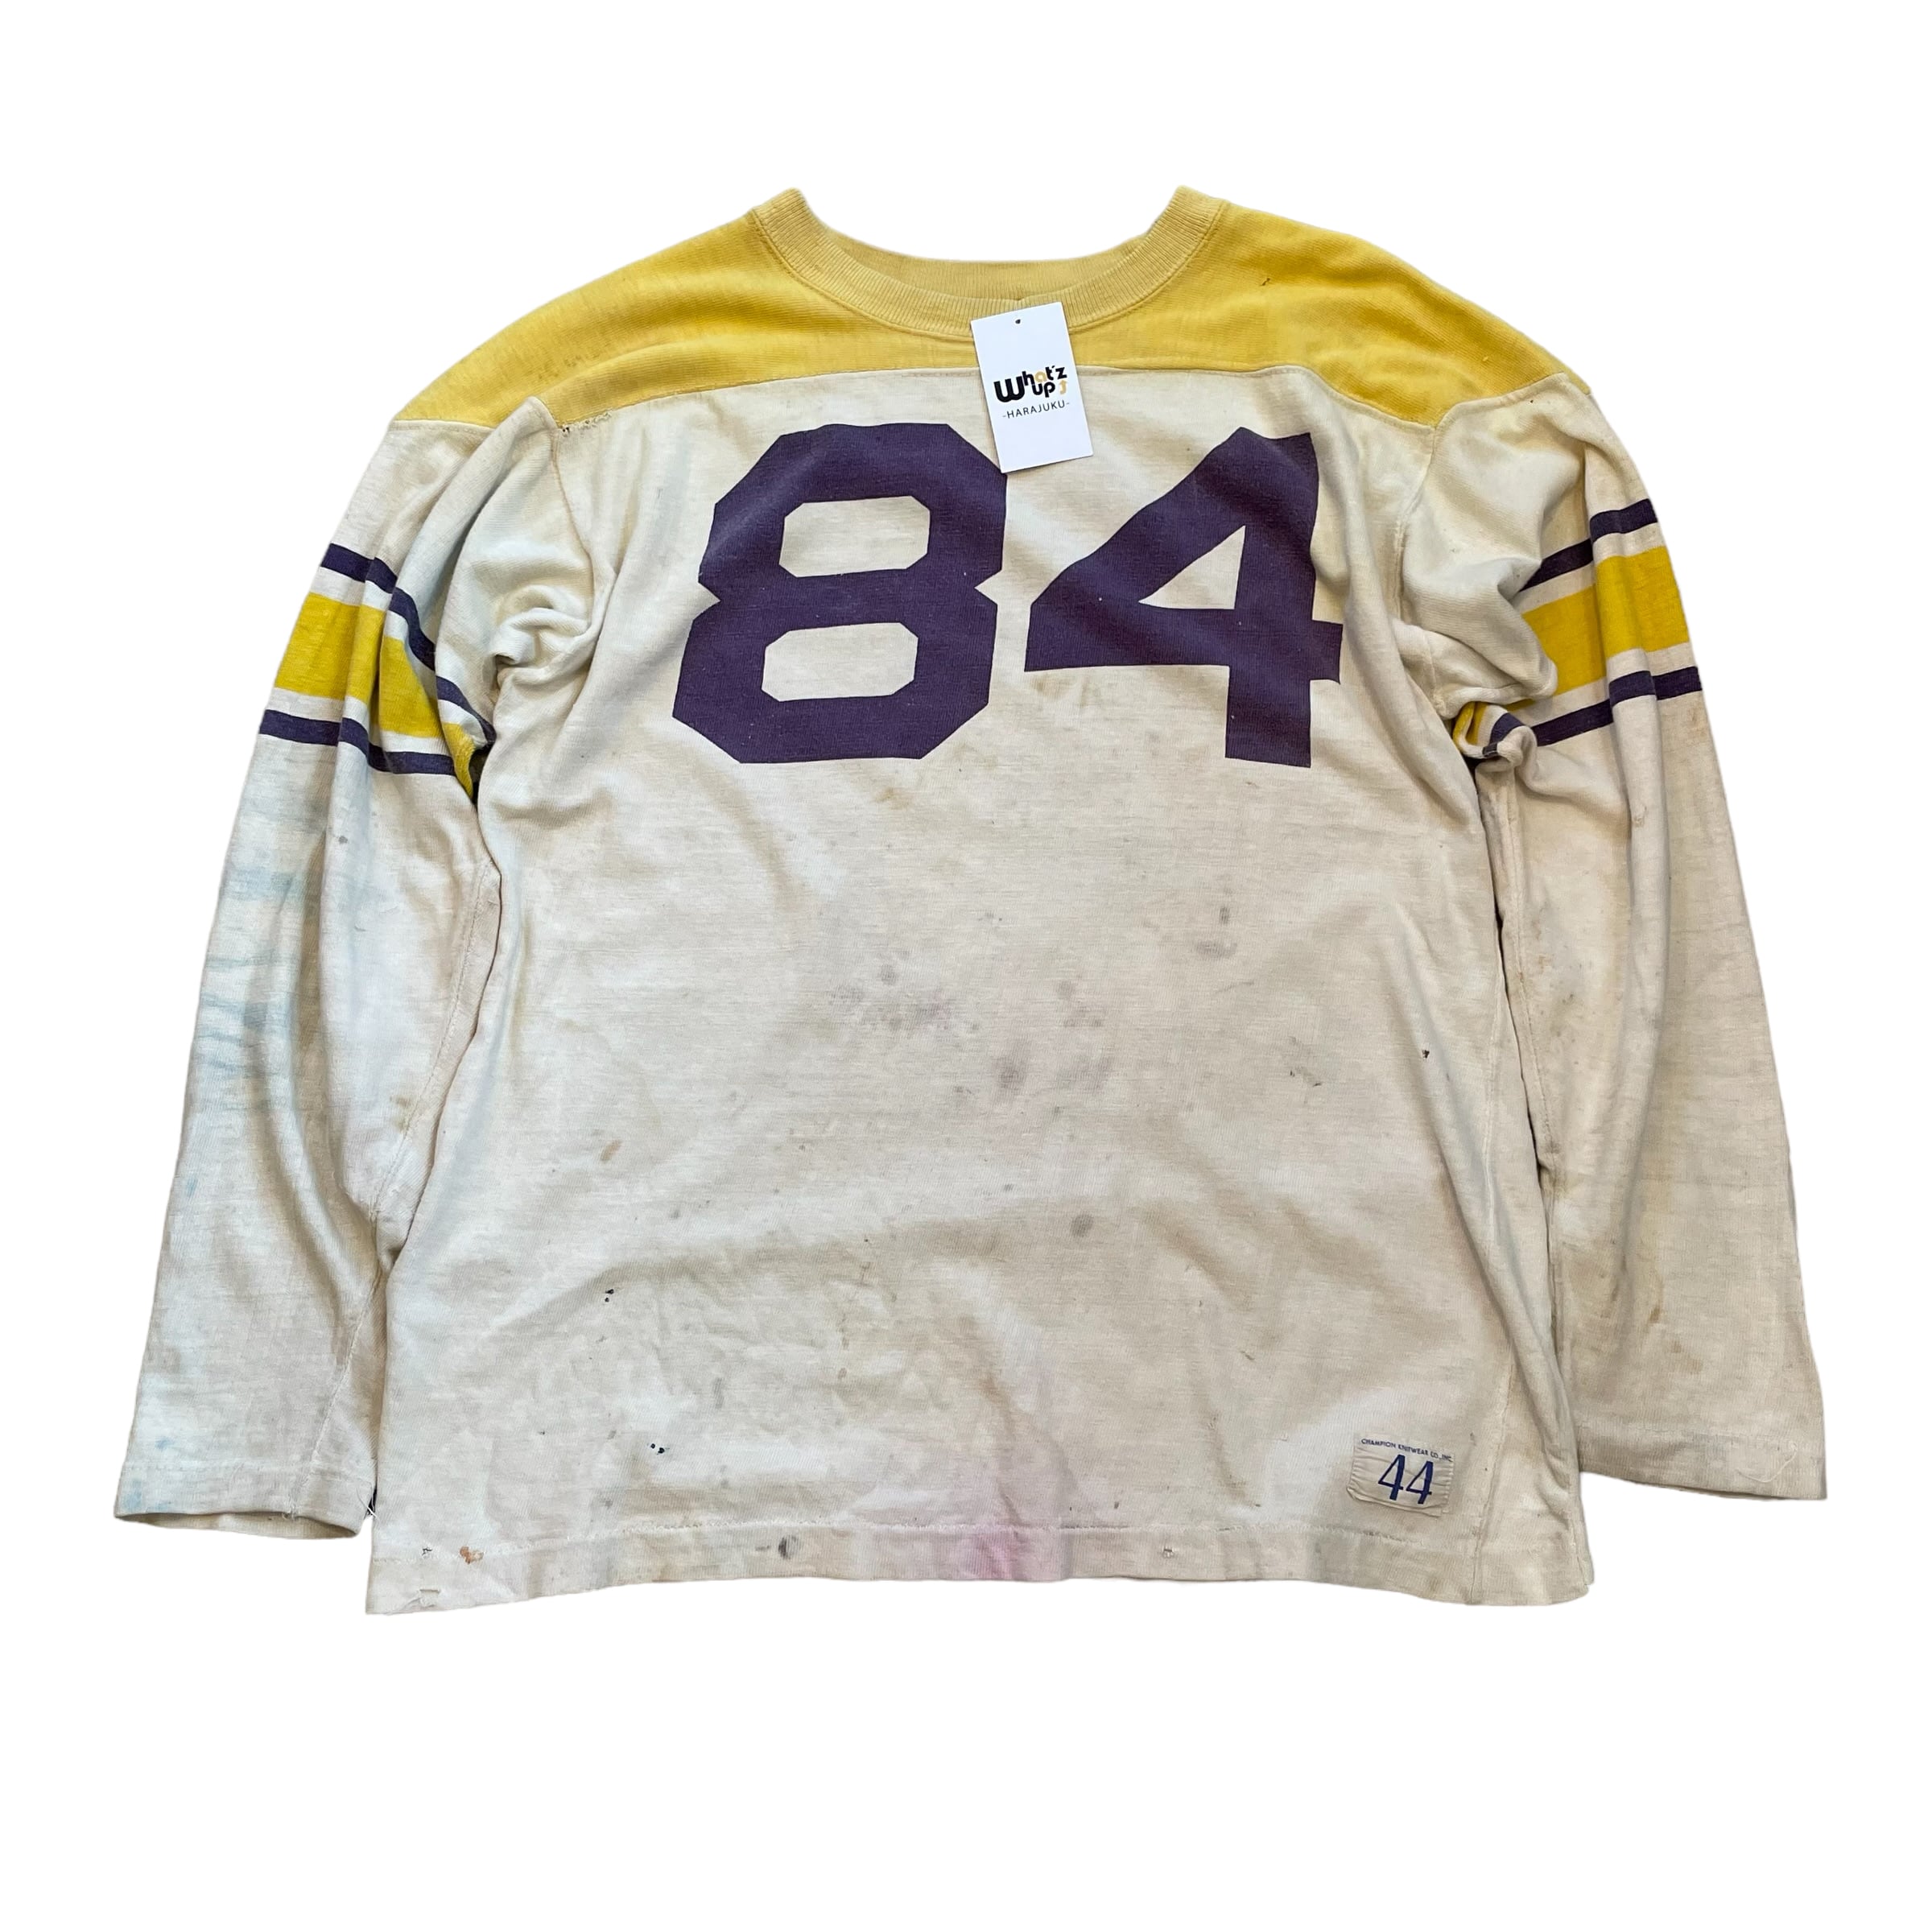 Special!! 50s Champion football shirt | What’z up powered by BASE